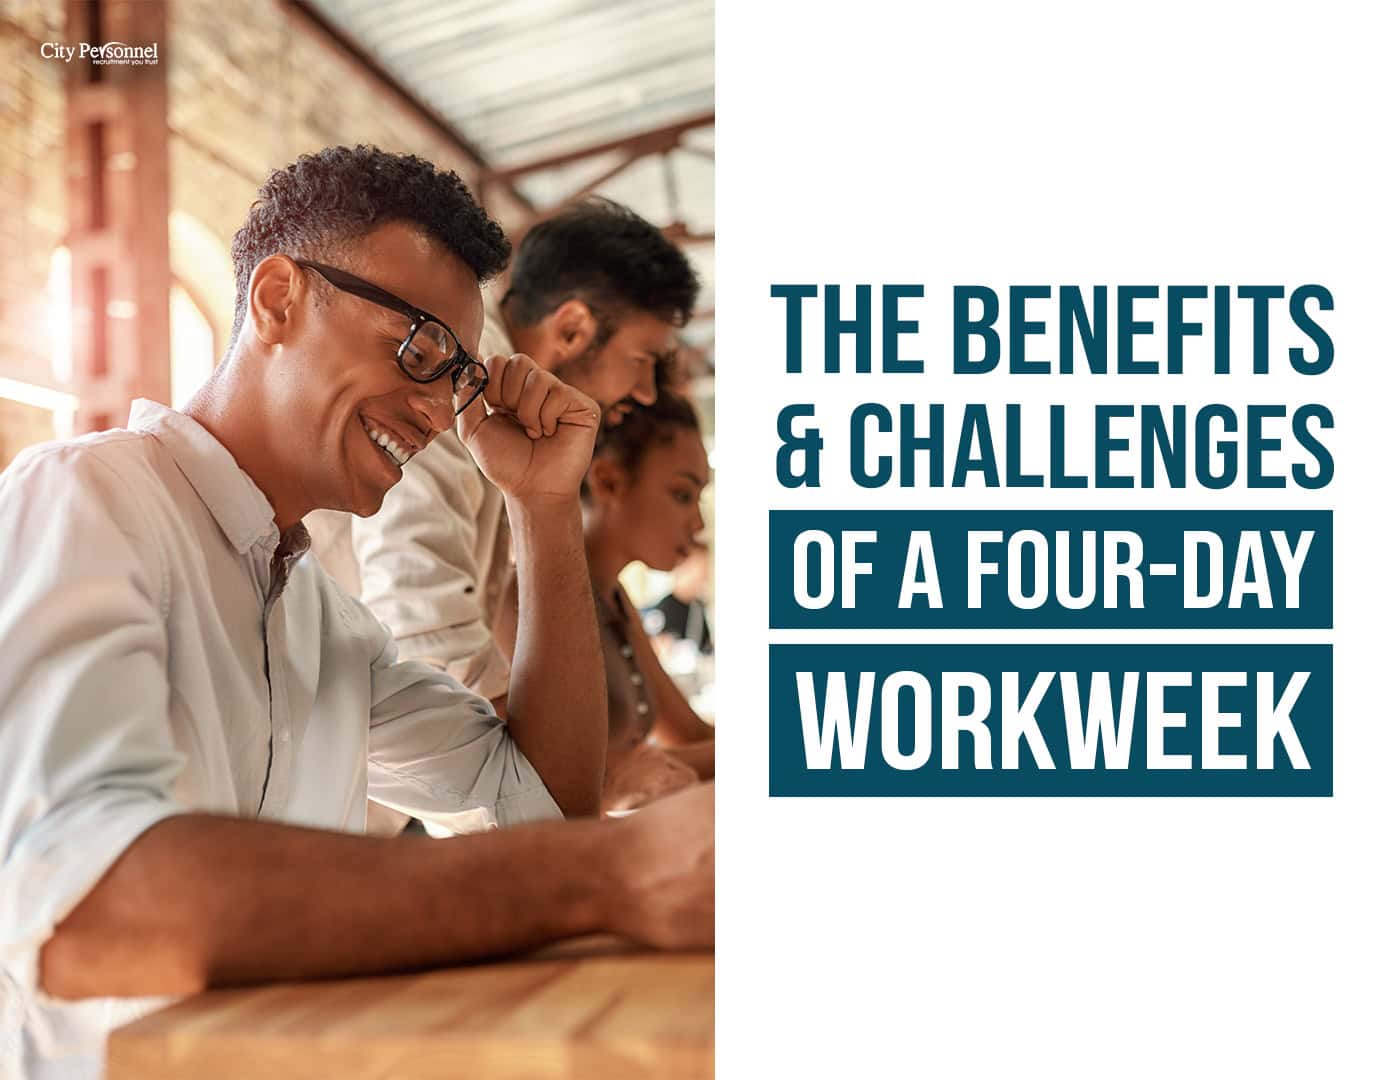 The Benefits and Challenges of a Four-Day Workweek